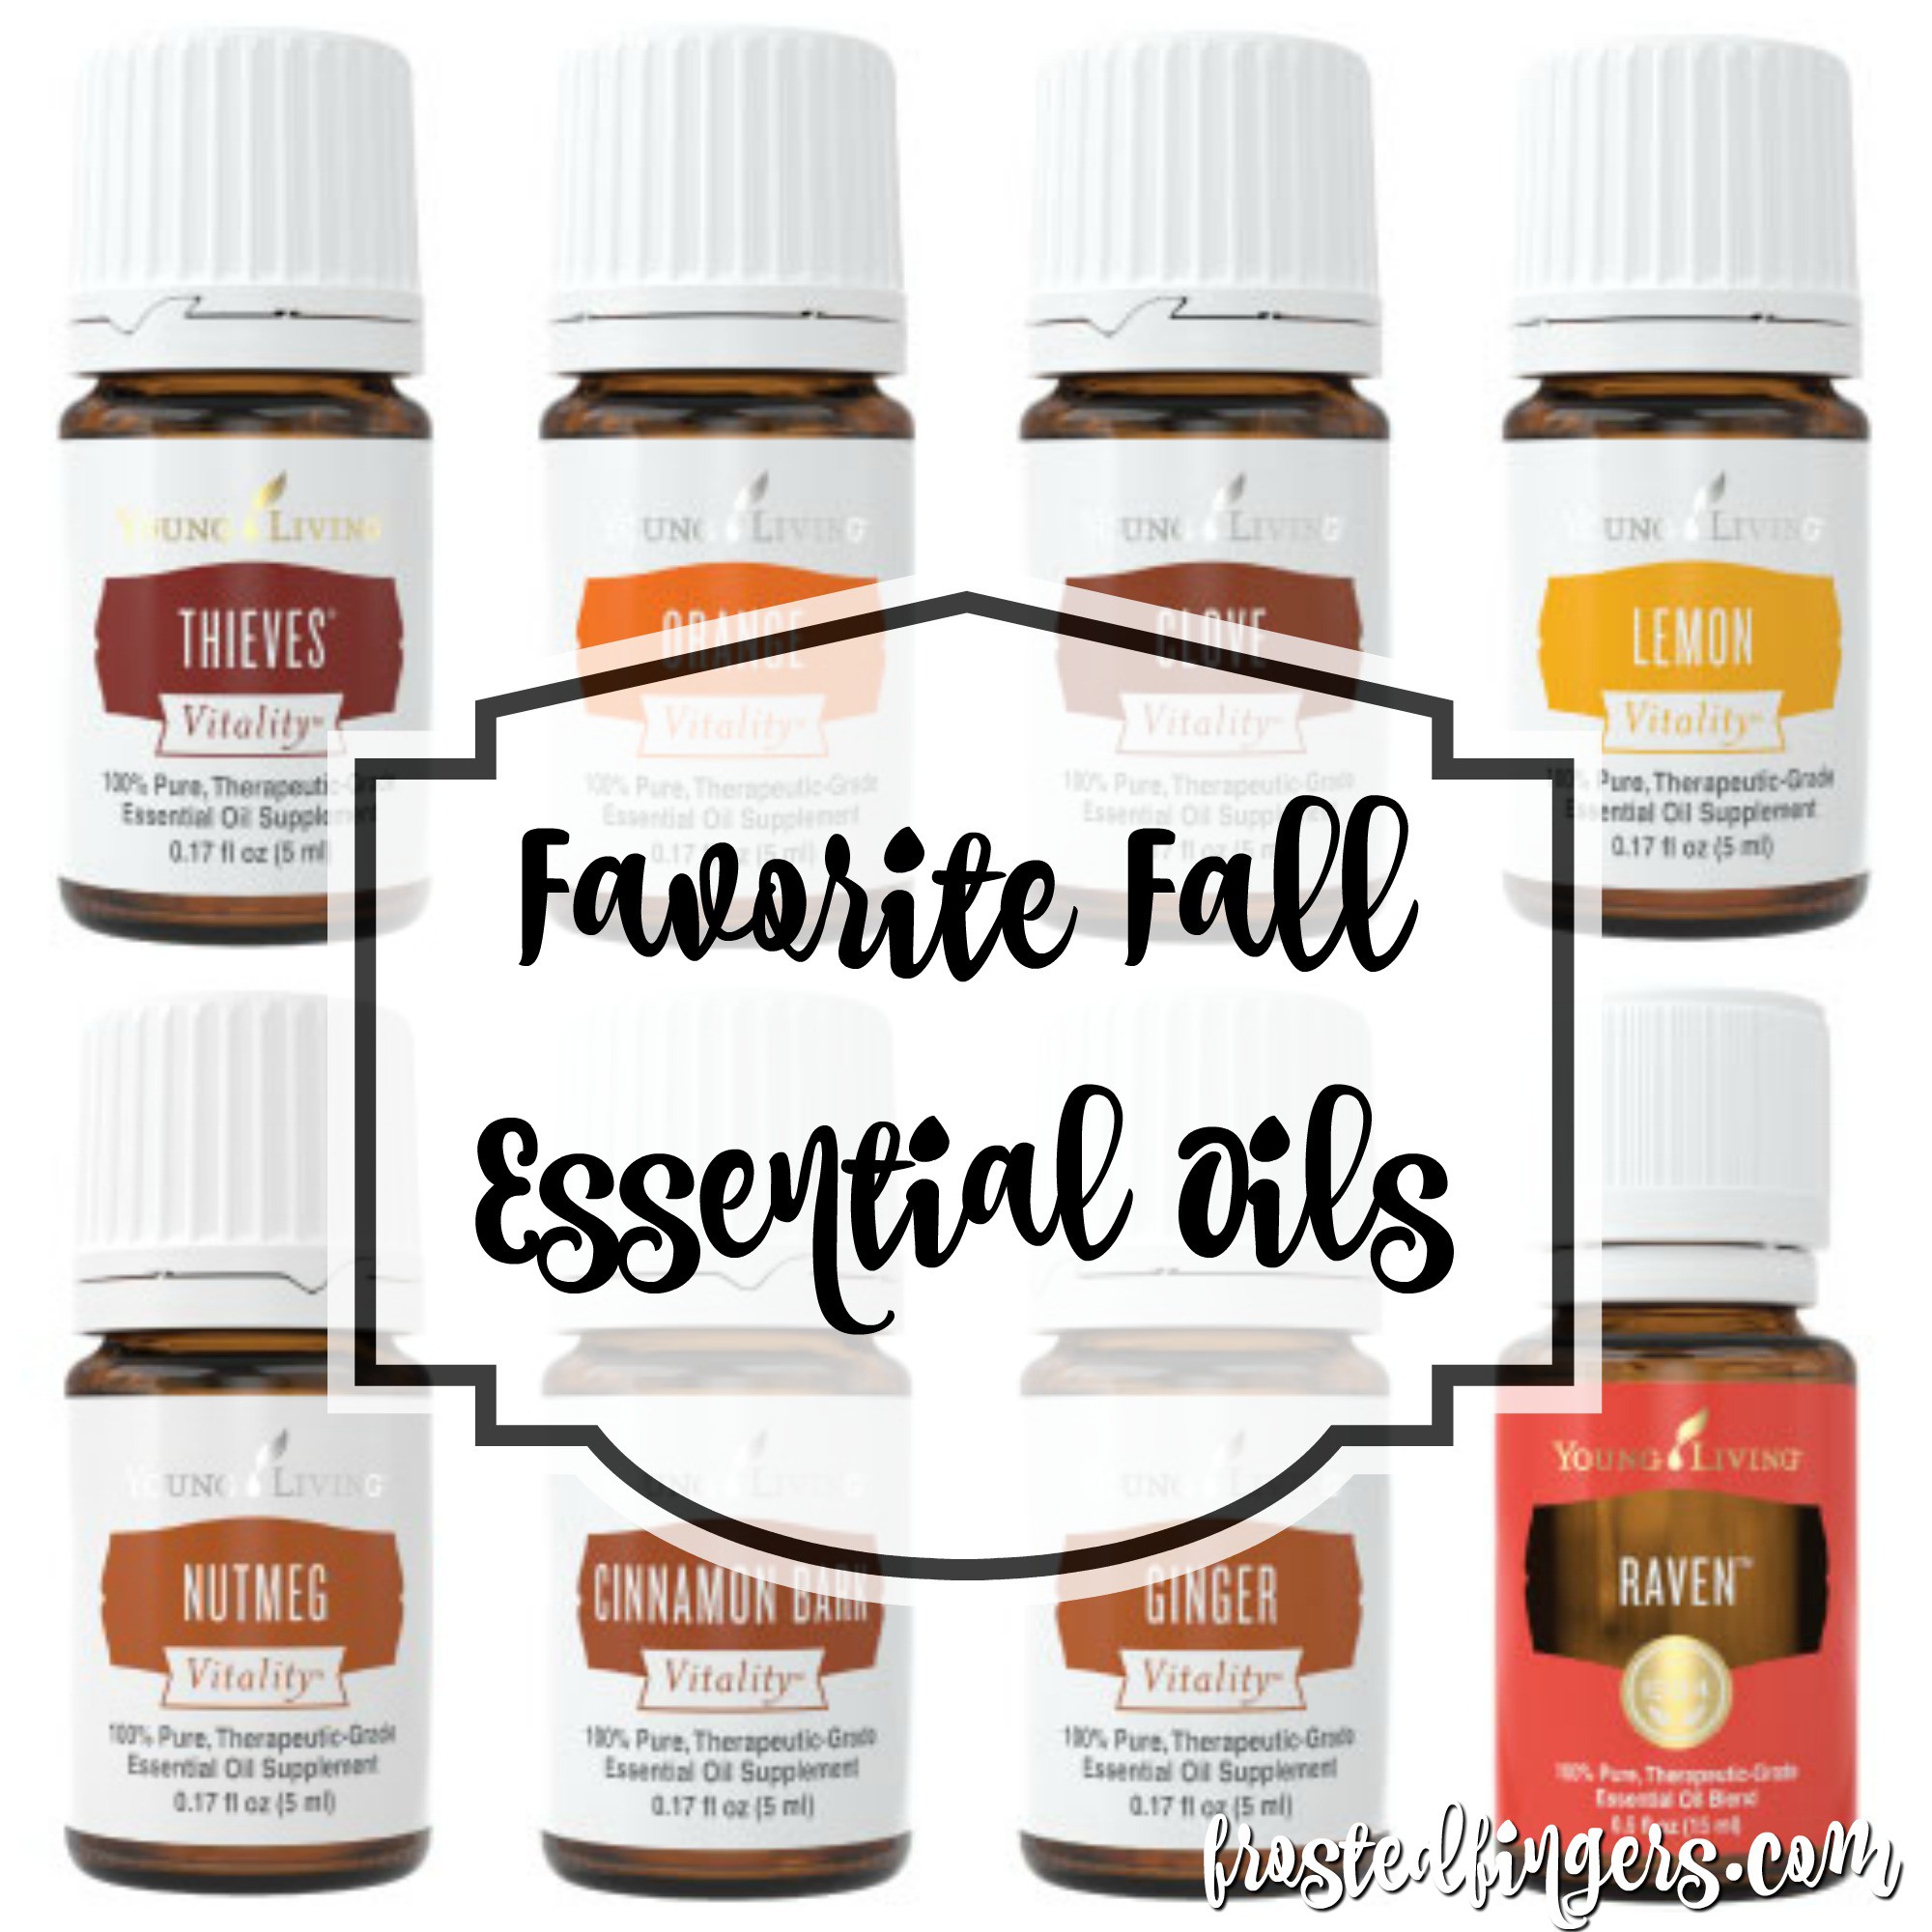 Young Living Nutmeg Vitality Essential Oil - 5ml